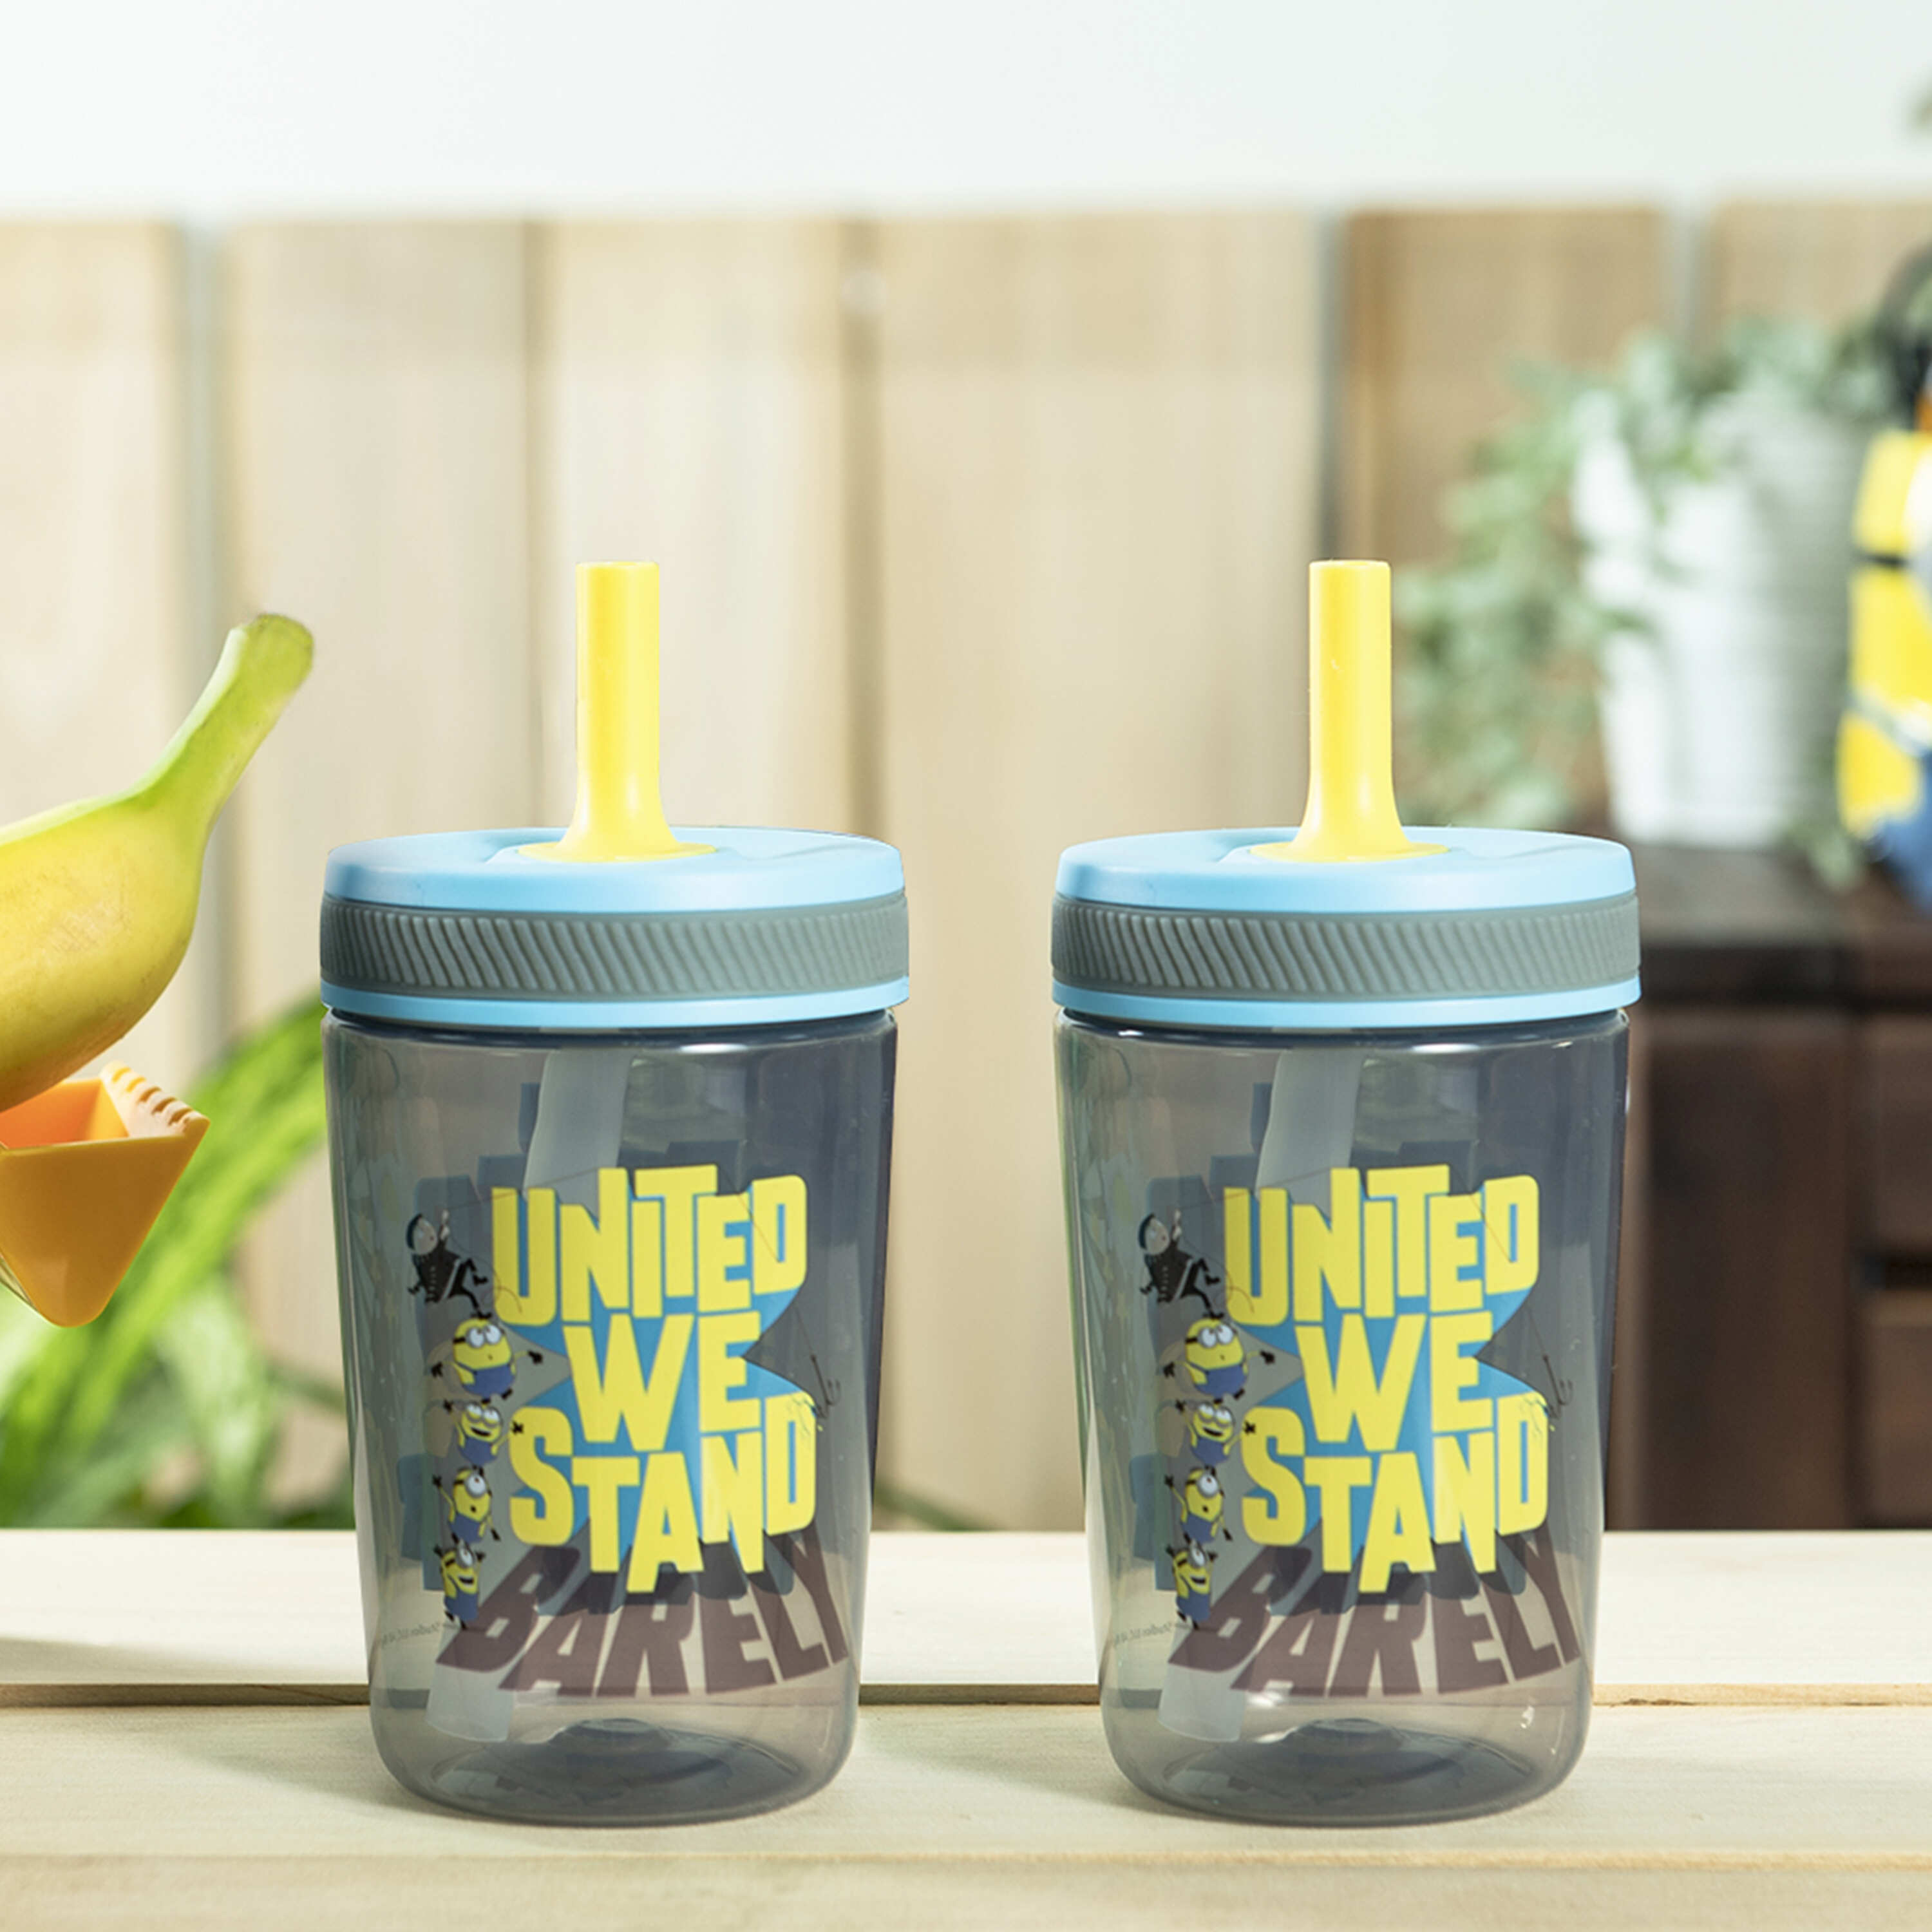 Ages 3+ Minions by Universal Studios 5.5" Plastic Cup by Zak Designs 2016 